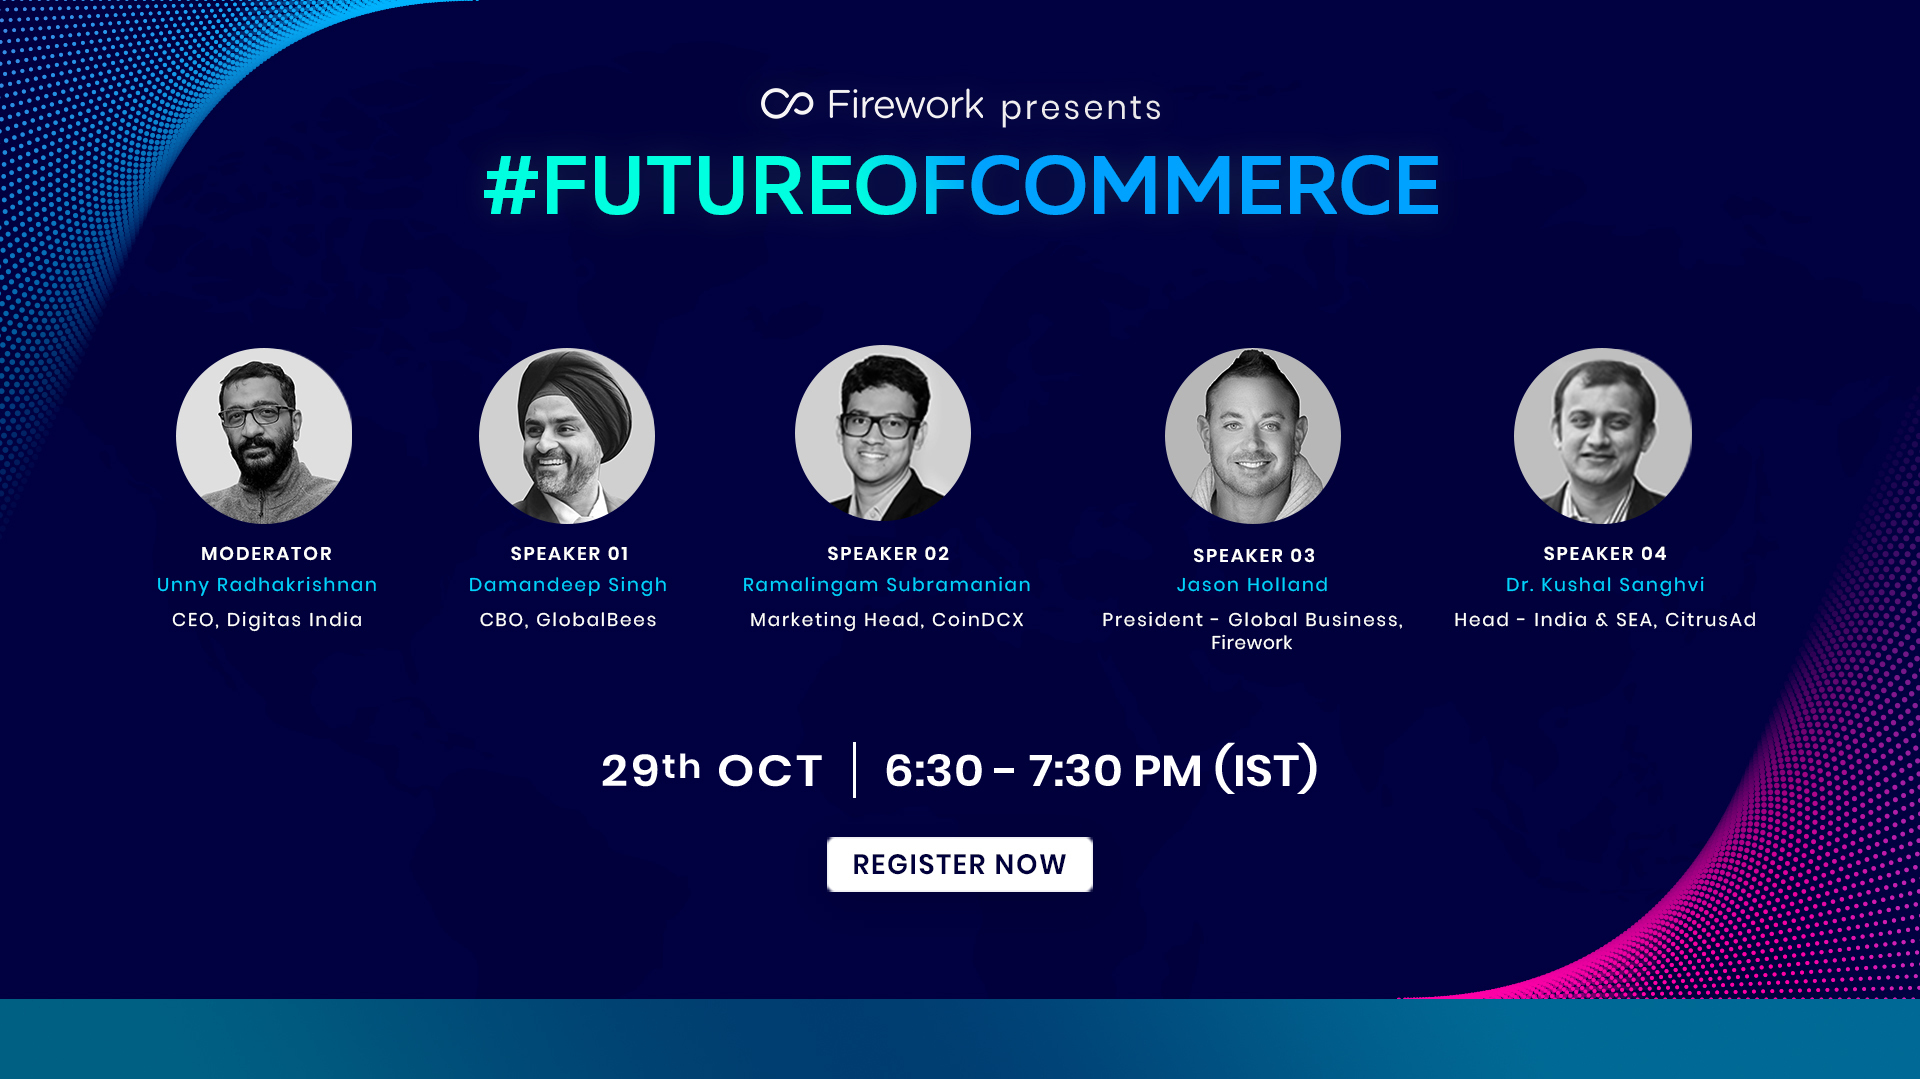 The Future Of E-Commerce is LIVE!